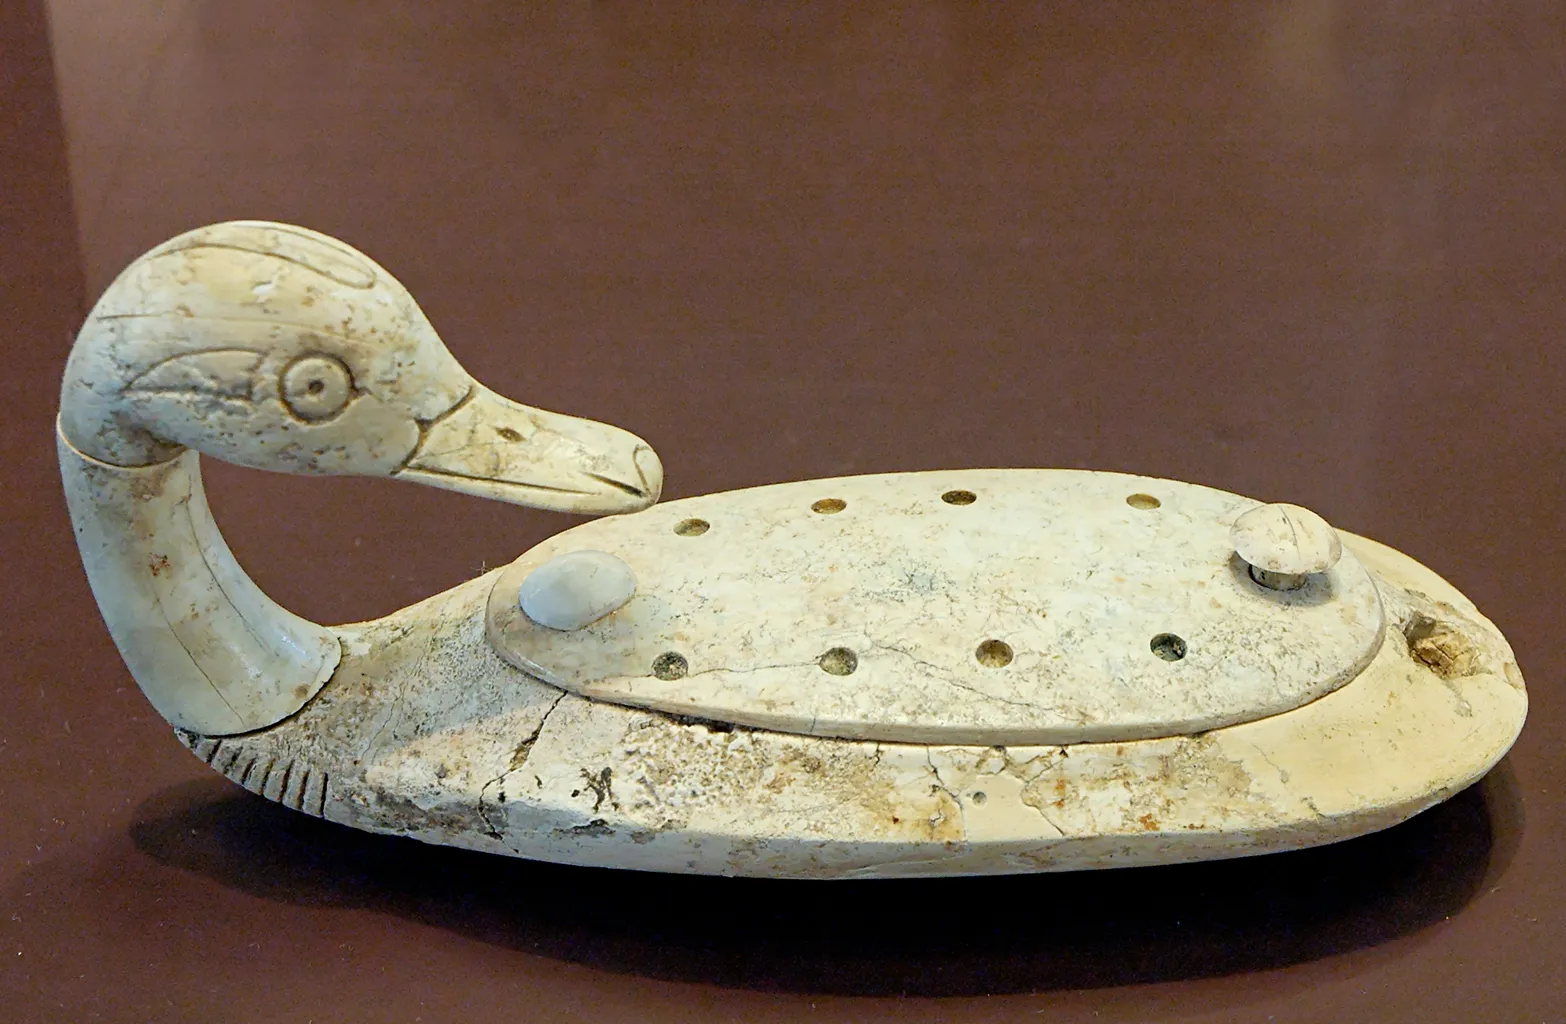 A duck container made from hippopotamus tusk, 13th century BC